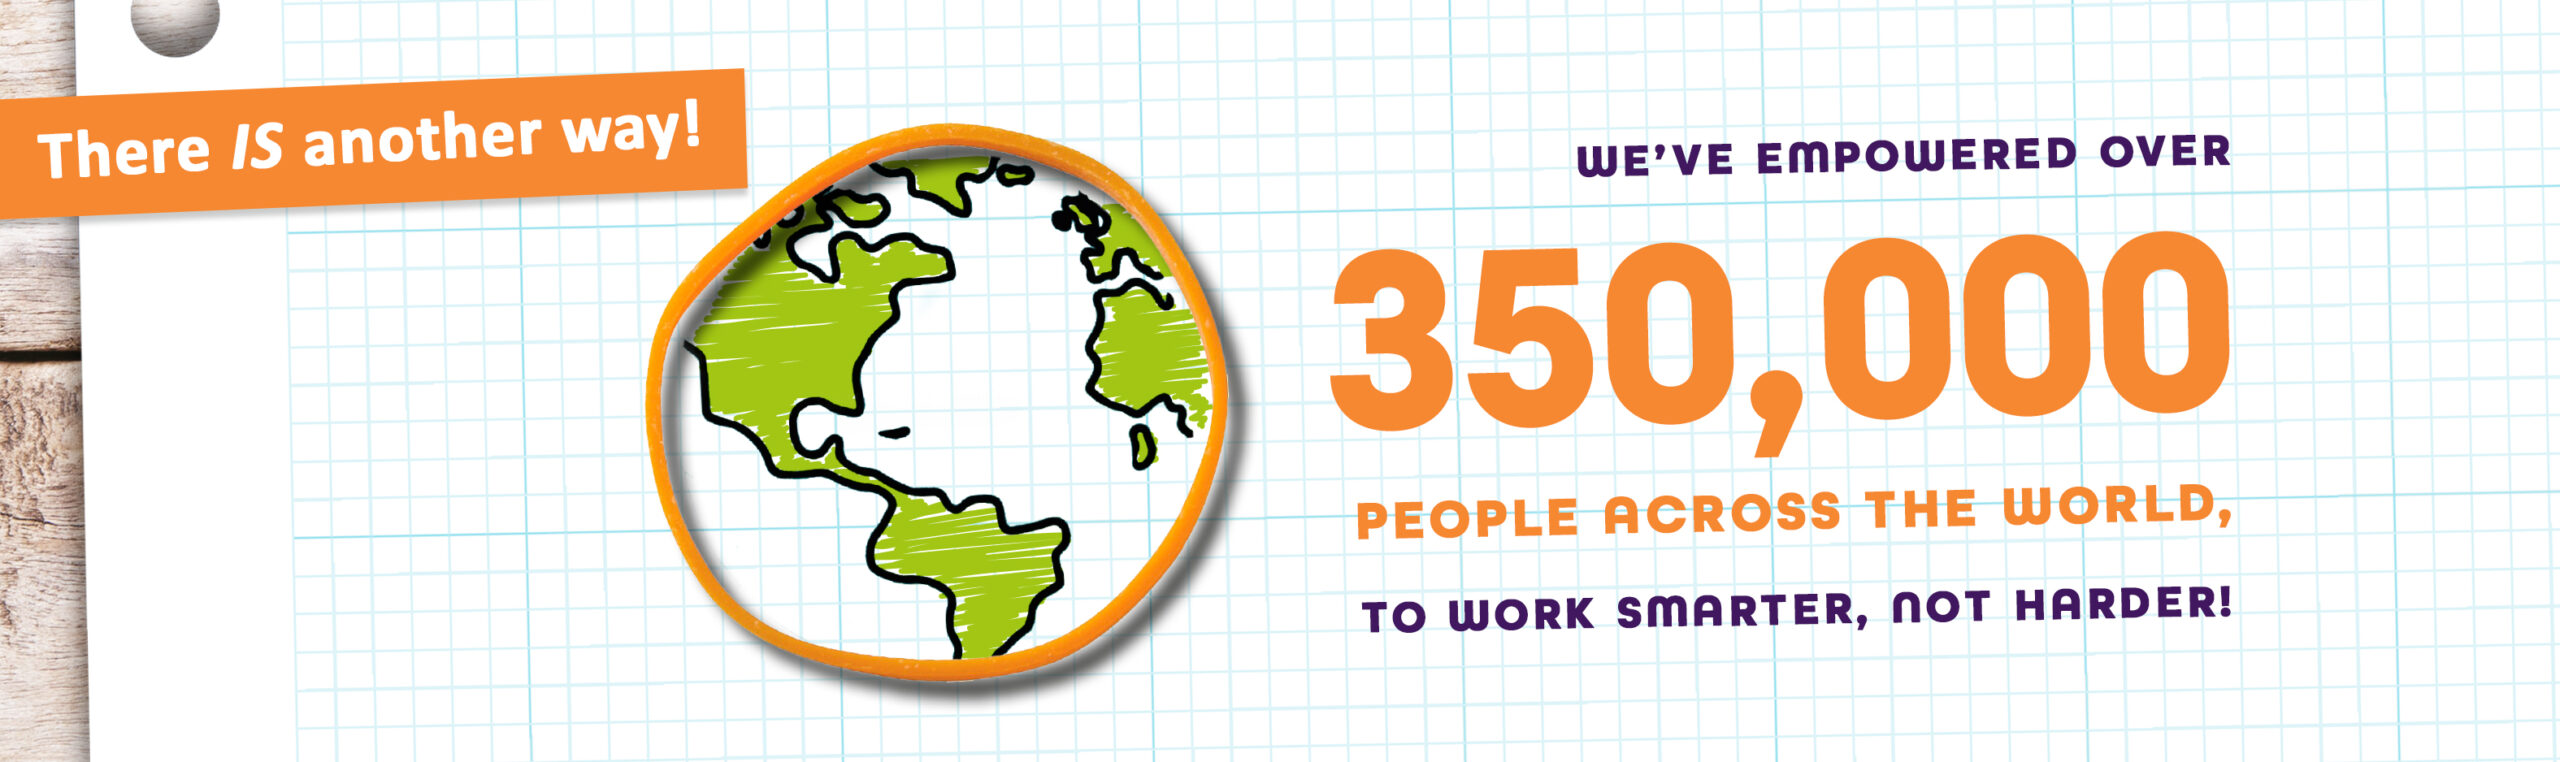 There IS another way! We've empowered over 350,000 people across the world to work smarter, not harder!